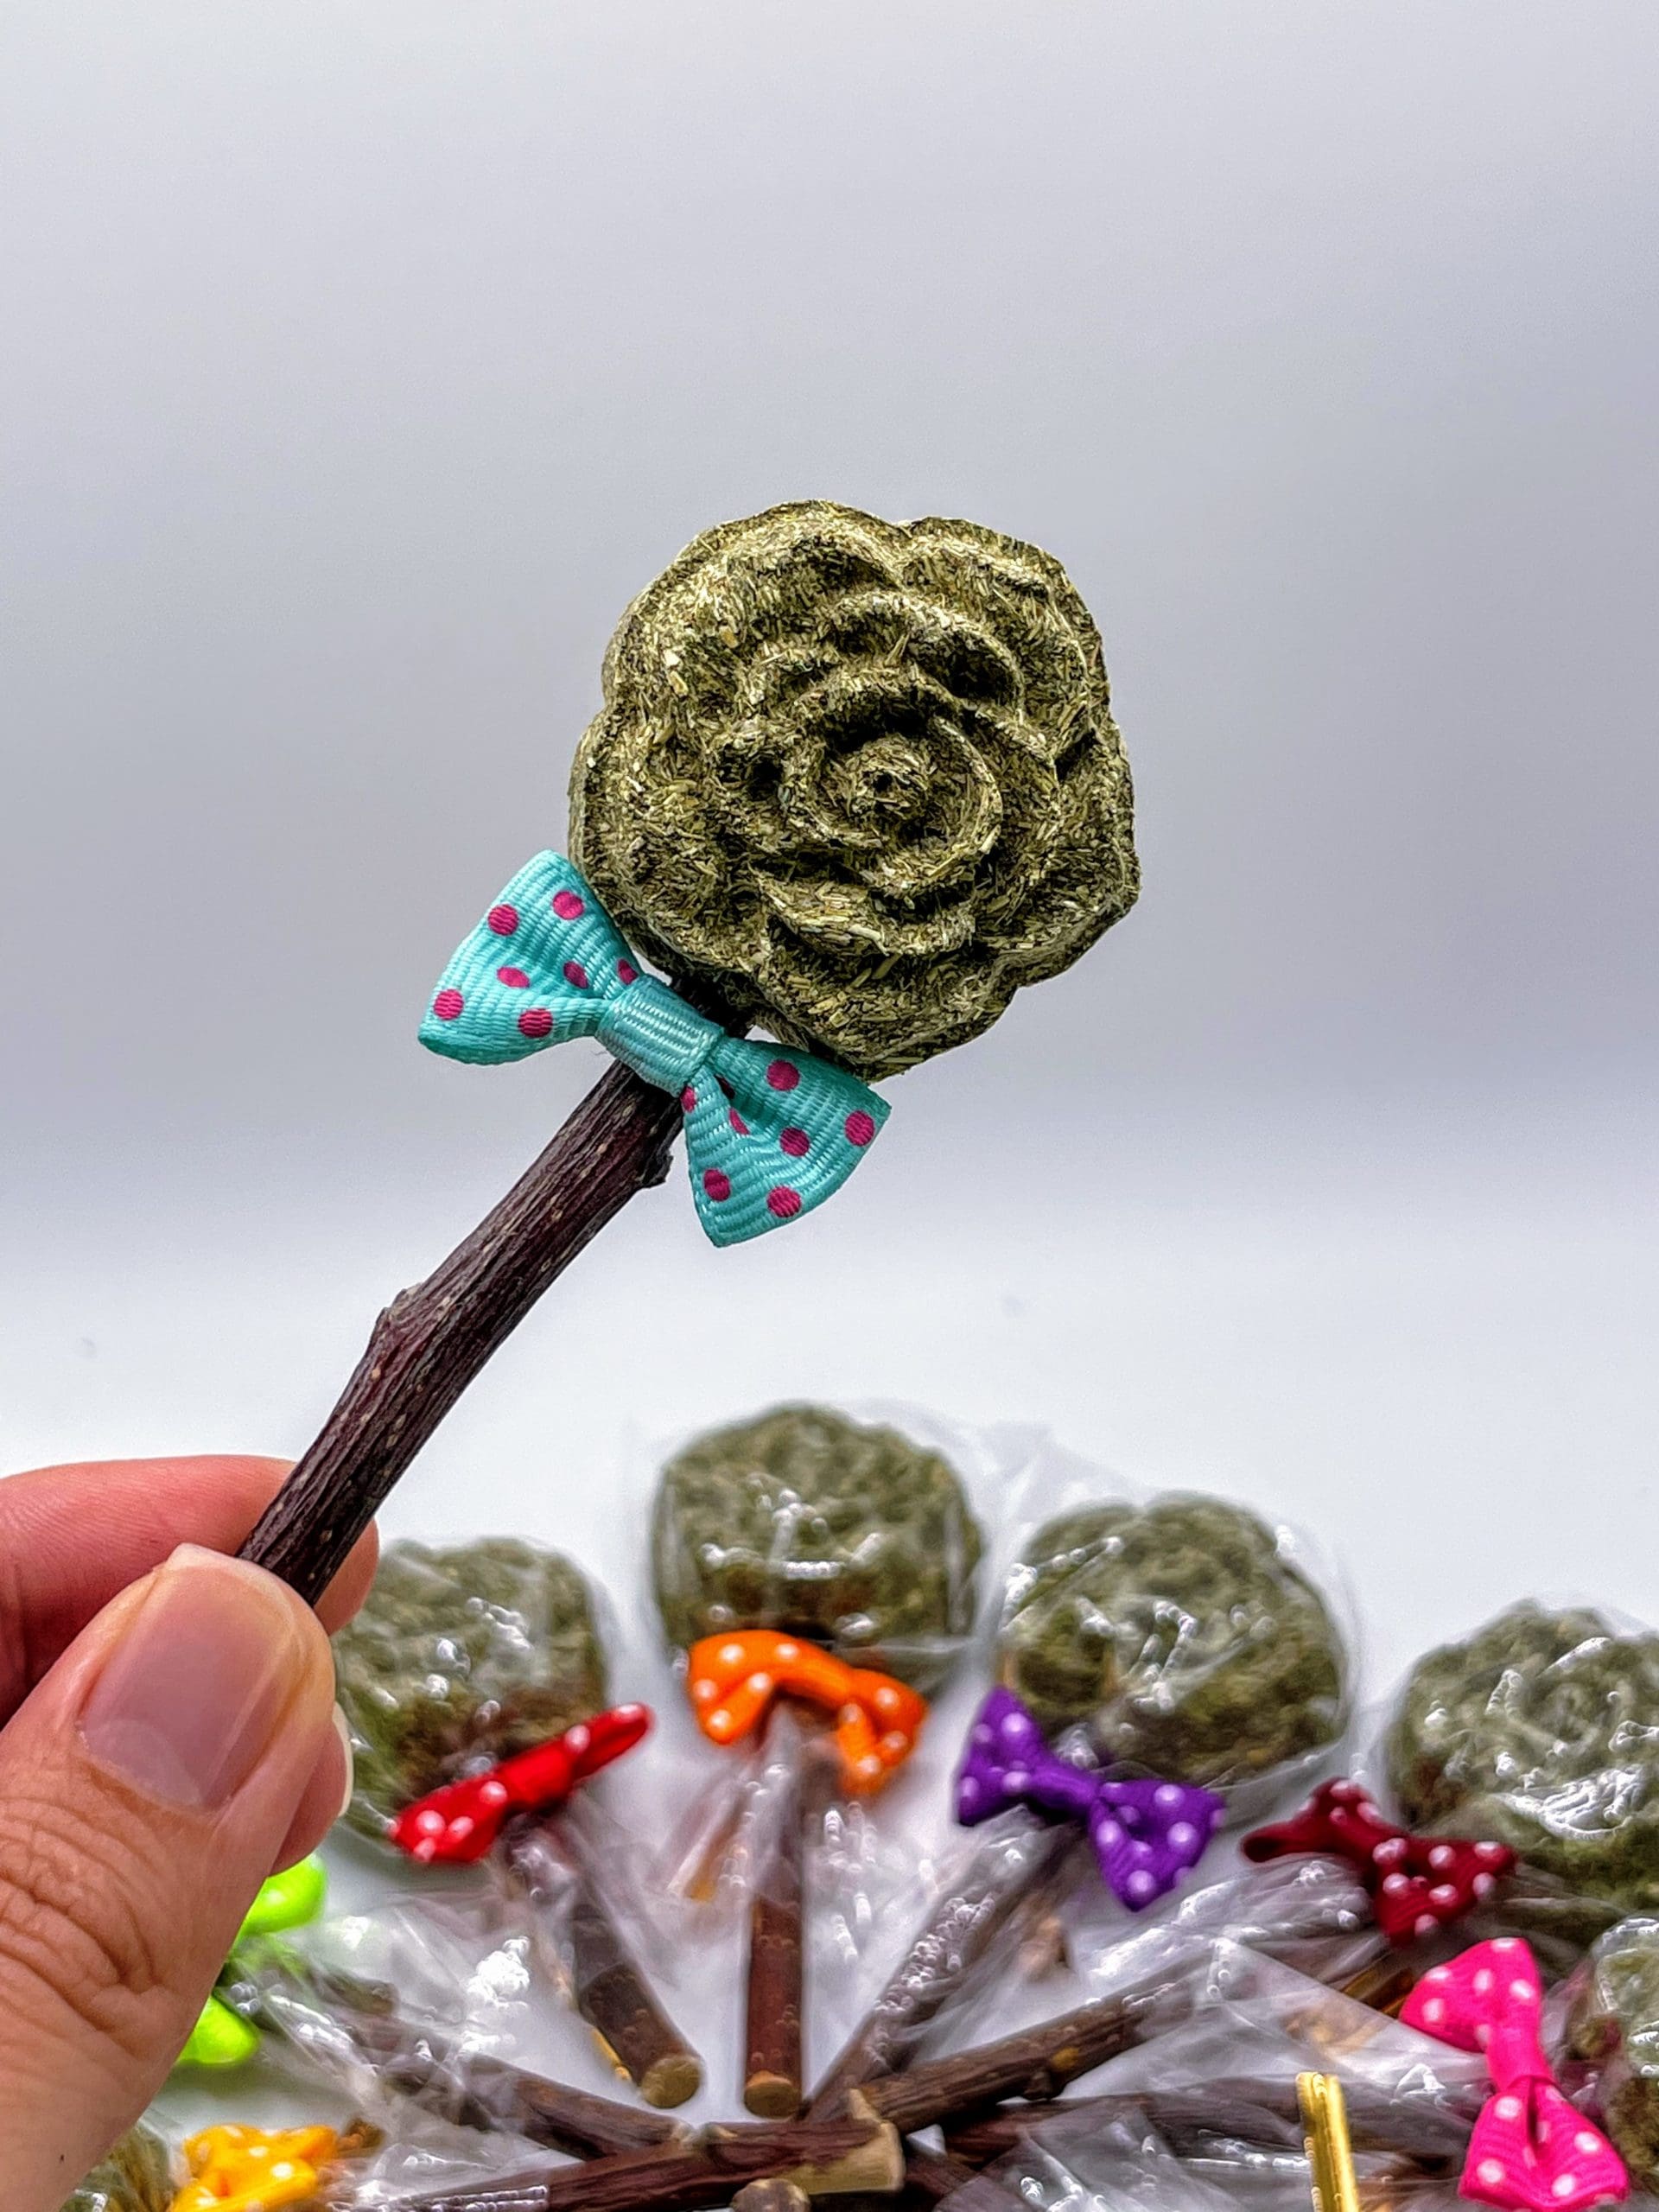 Timothy Hay Rose Lollipop and Apple Stick Treat For Rabbits, Hamsters, Guinea Pigs, Chinchillas, and Small Rodents